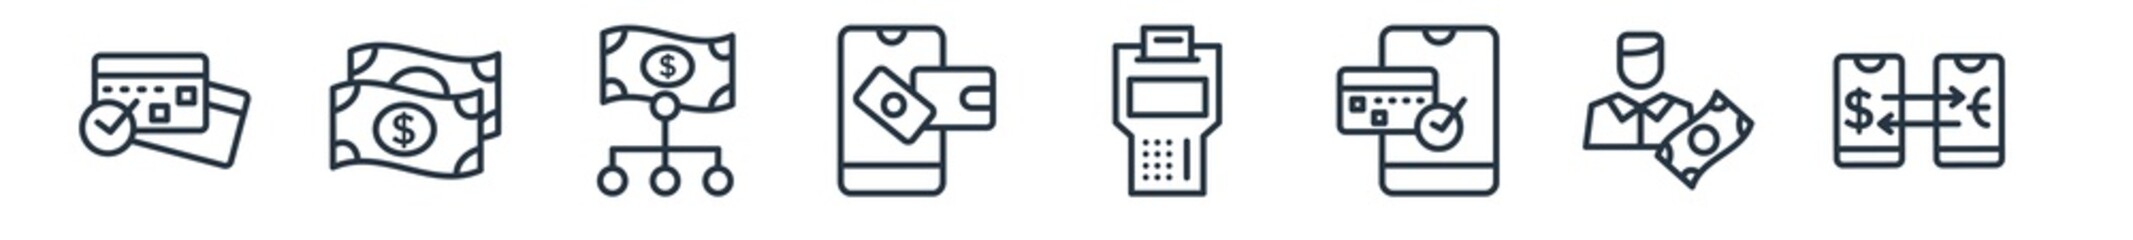 linear set of payment methods outline icons. line vector icons such as debit payment, dollar, sharing, online wallet, point of service, mobile transfer vector illustration.